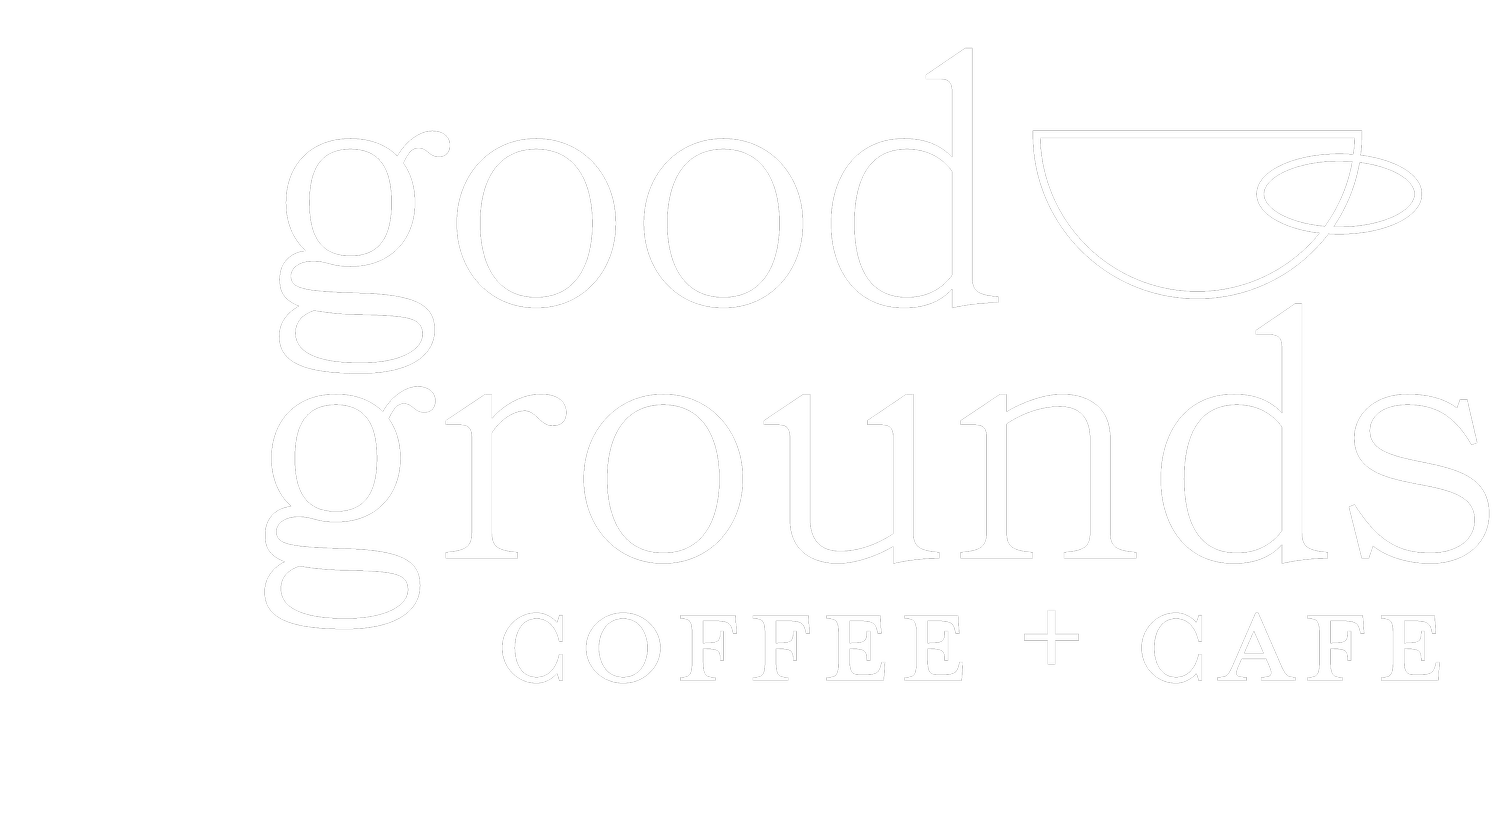 Good Grounds Coffee + Cafe